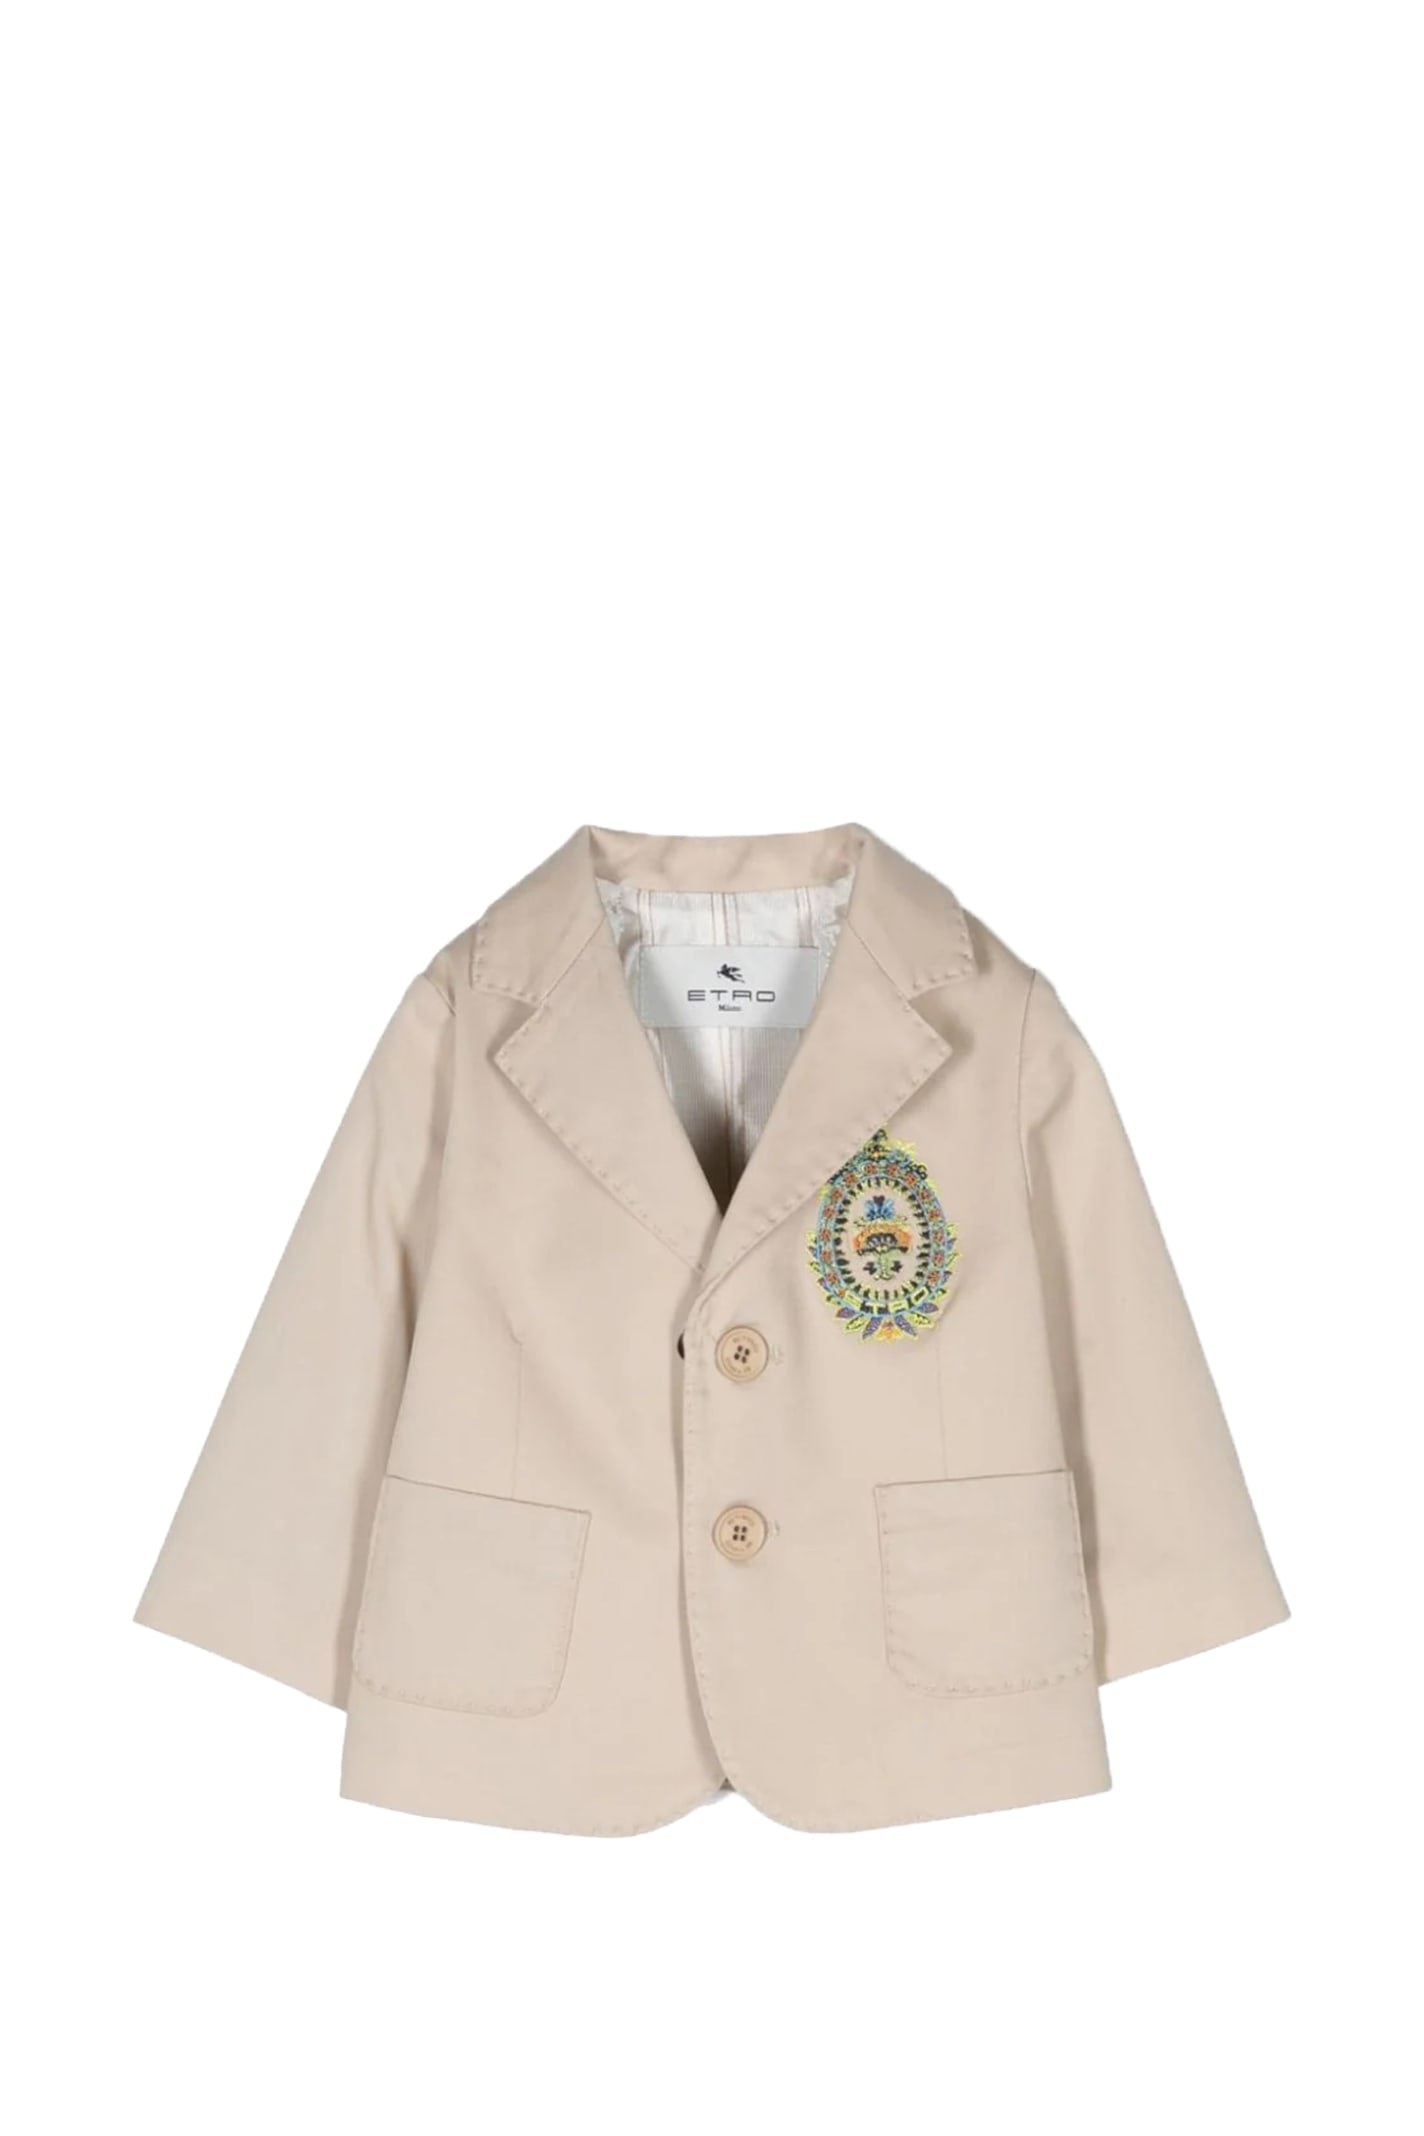 Shop Etro Jacket With Embroidered Heraldic Coat Of Arms In Beige